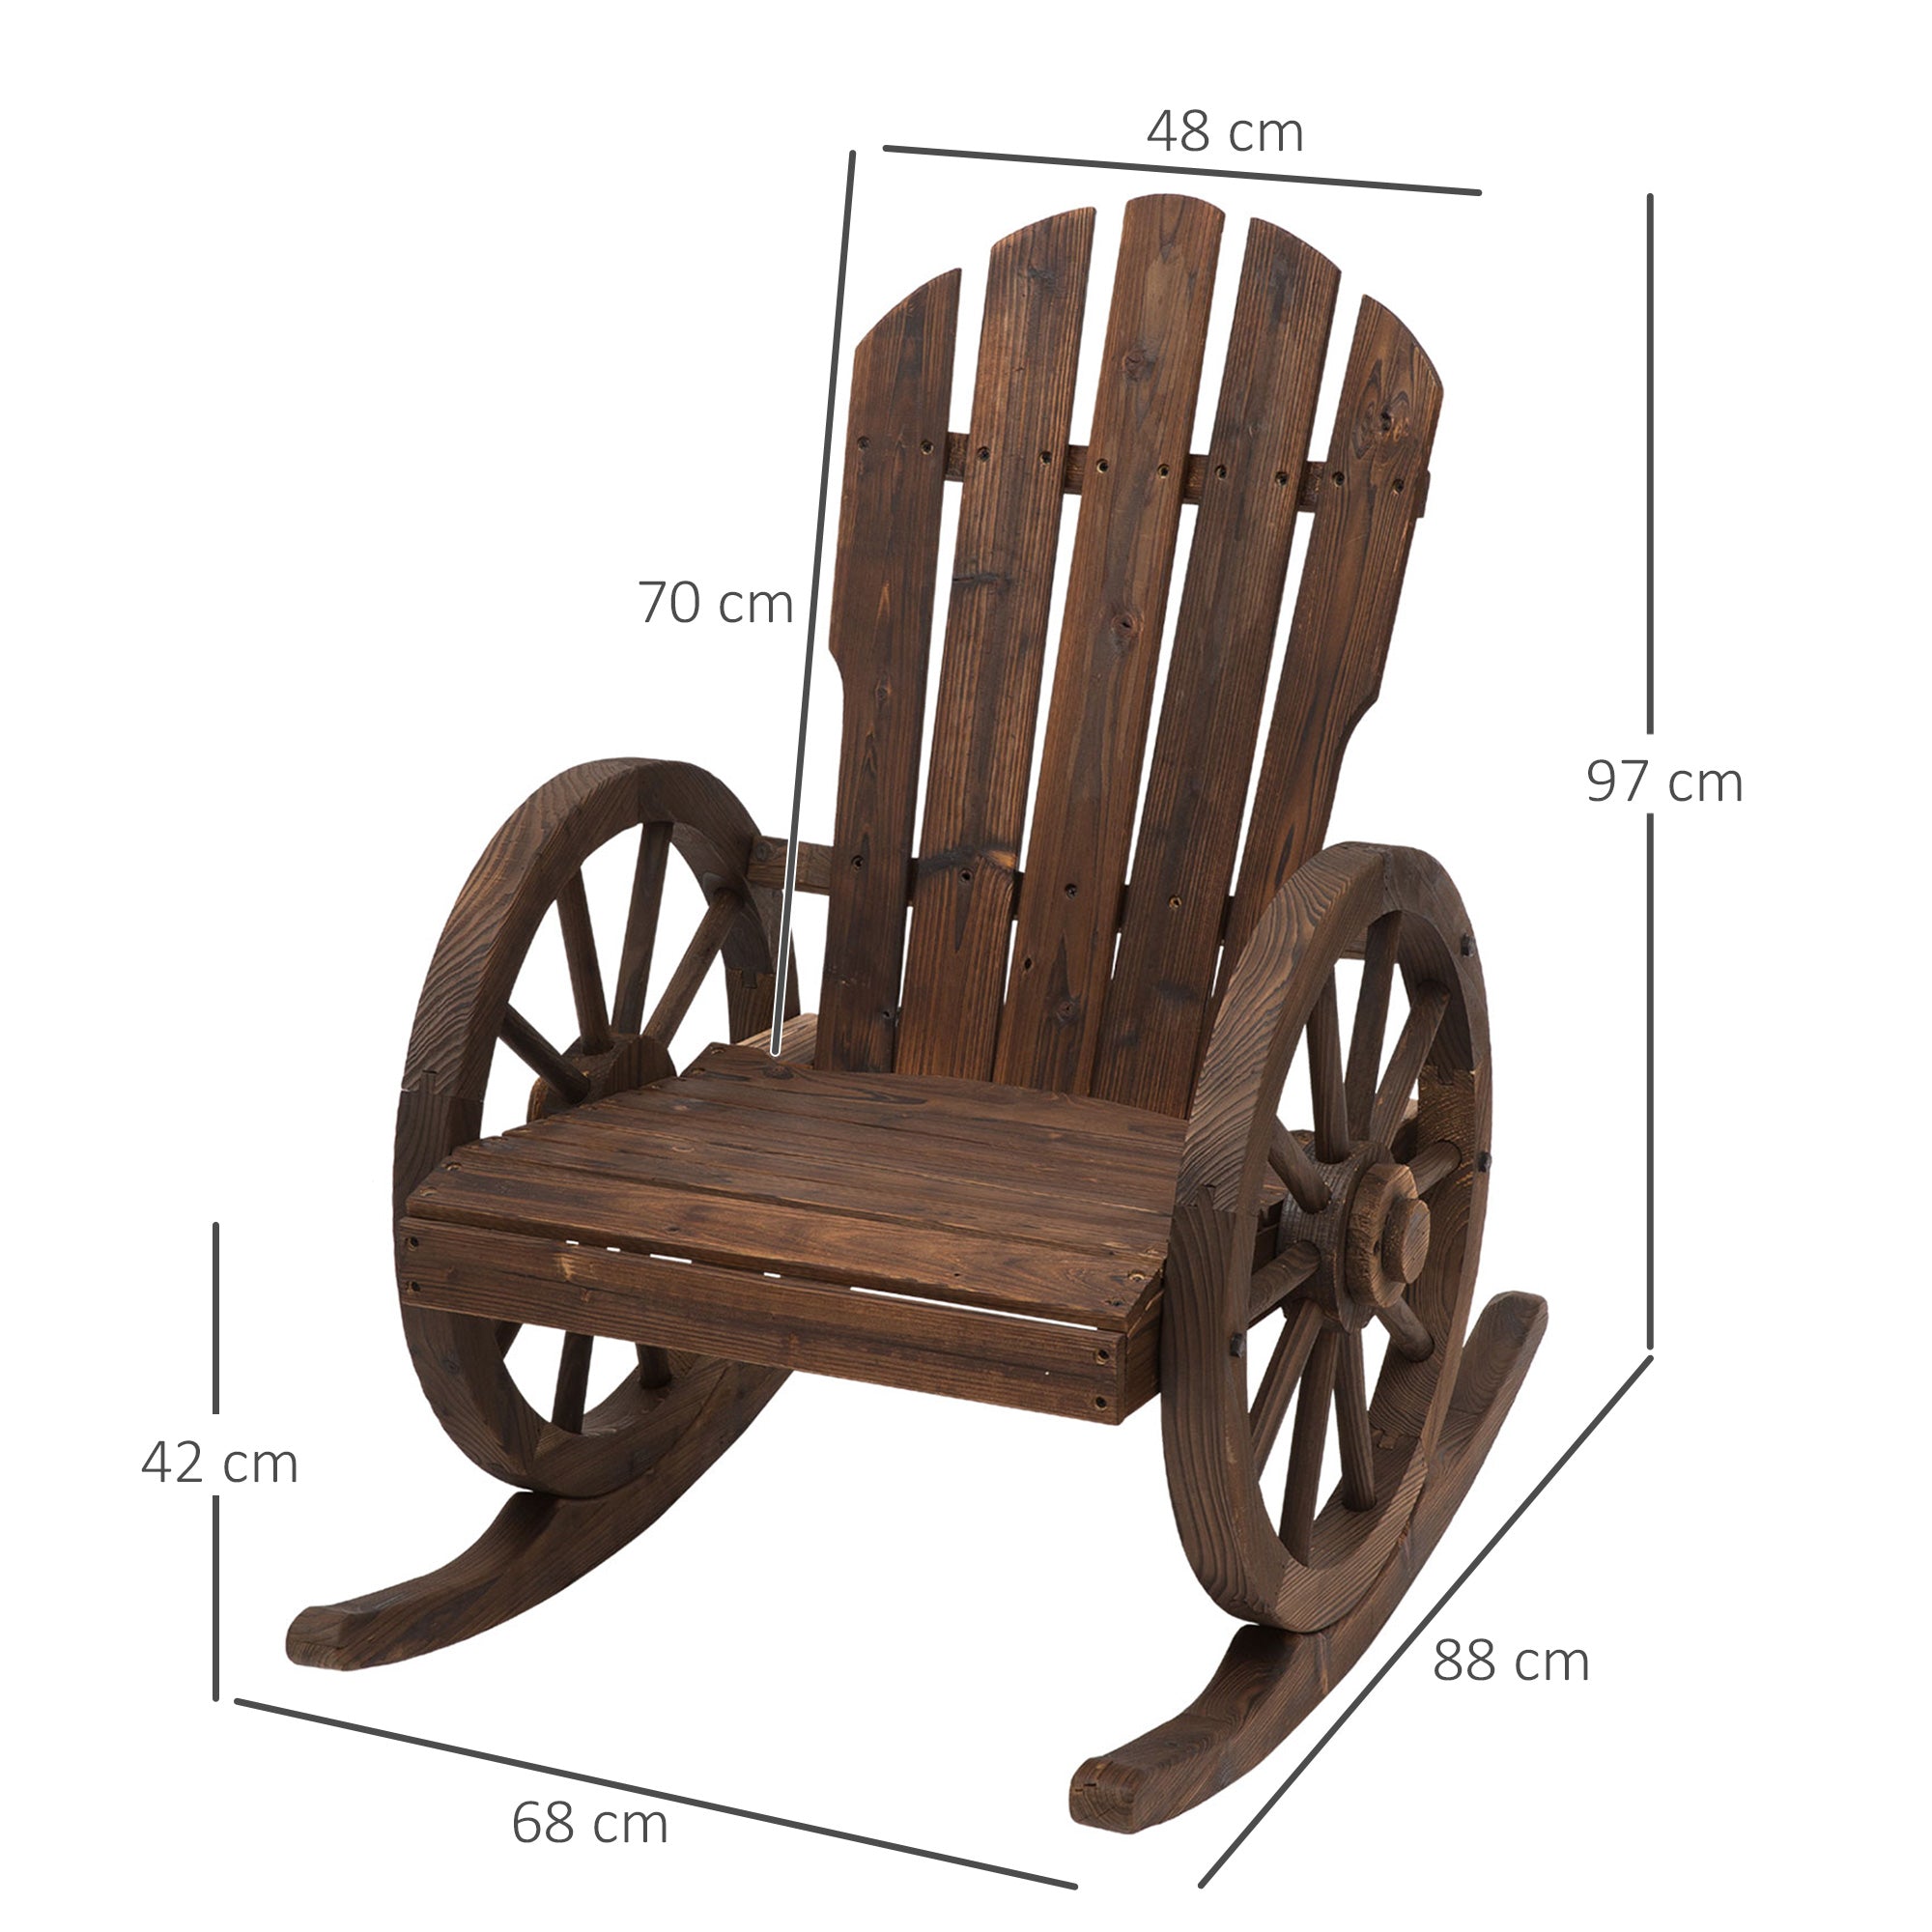 Outsunny Wooden Adirondack  Rocking Chair Reclining Armchair Outdoor Garden Furniture Patio Porch Rocker - Carbonized Wood Colour - Inspirely